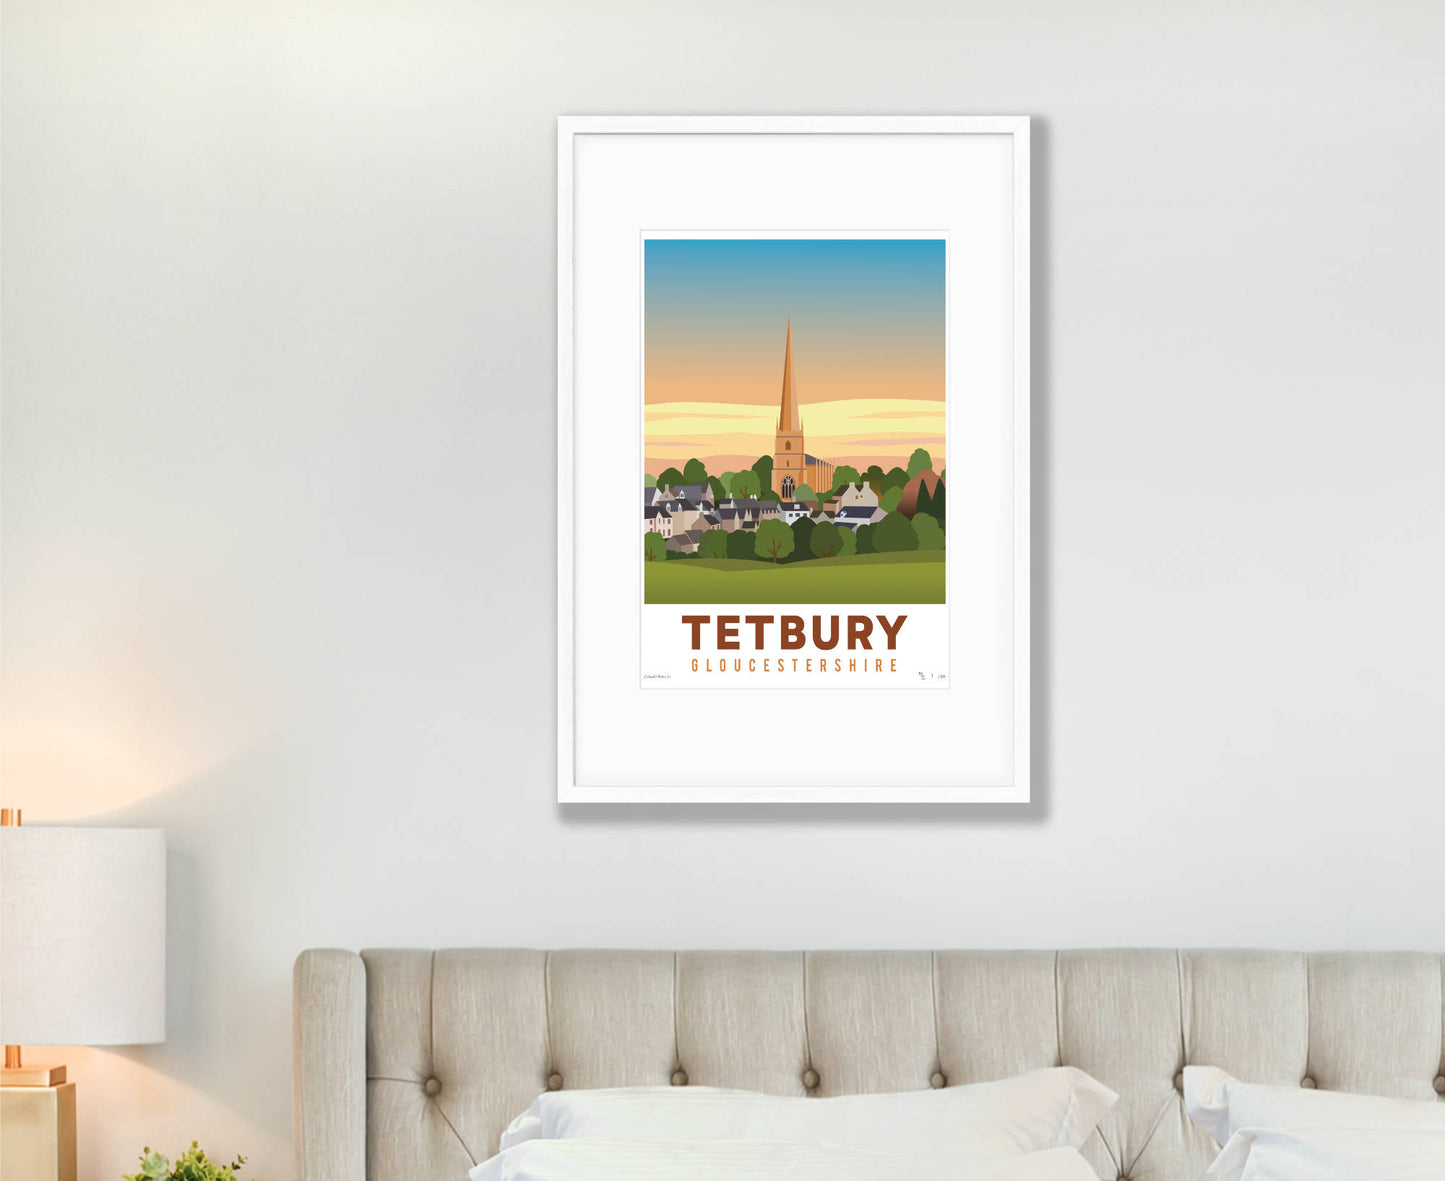 Tetbury Church Poster – Limited Edition wall decor white frame